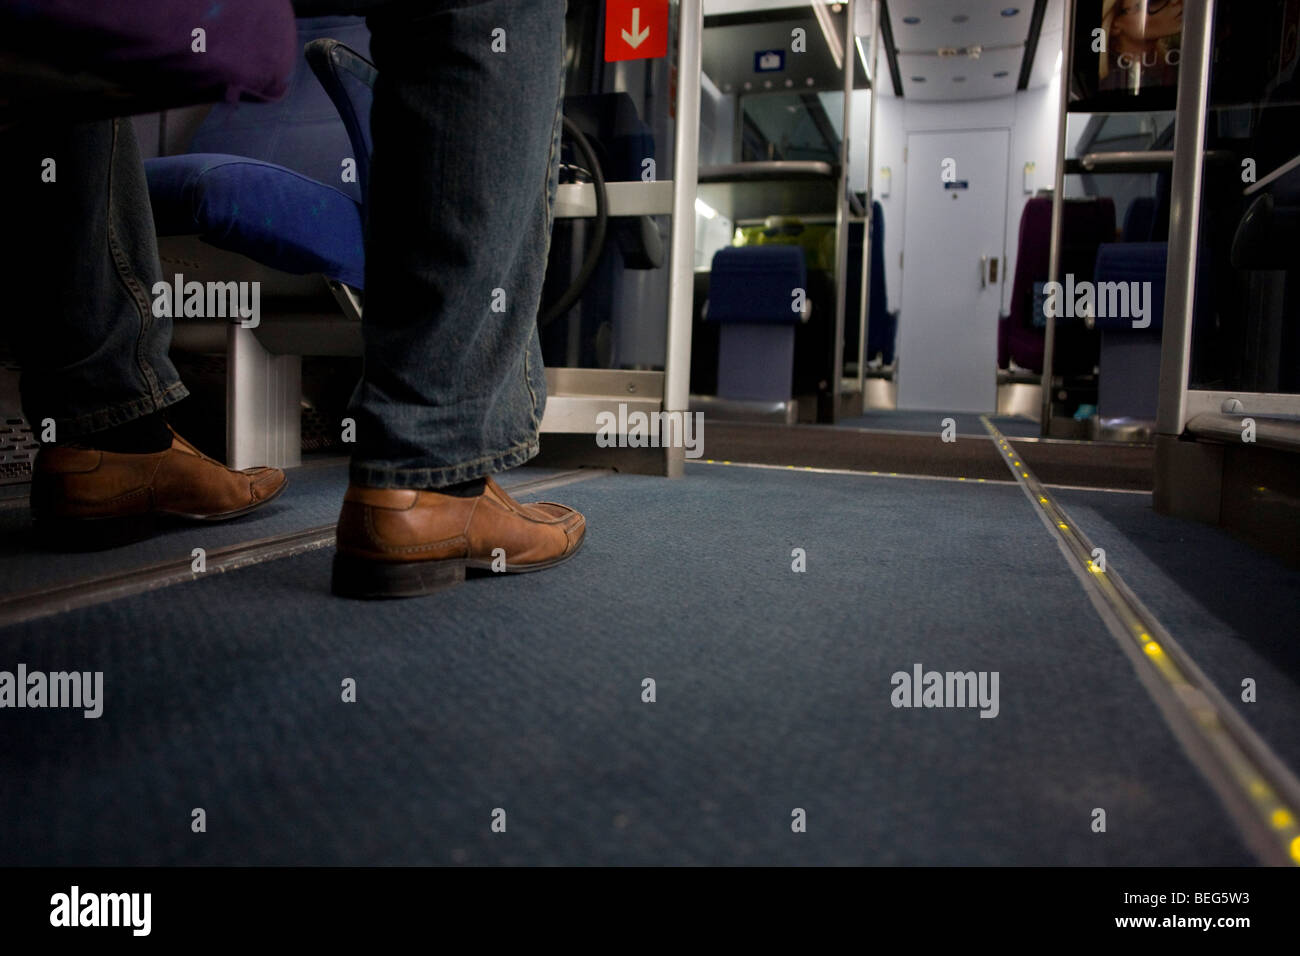 A passenger's leg is seen on the floor of a Heathrow Express train between terminals at Heathrow Airport. Stock Photo